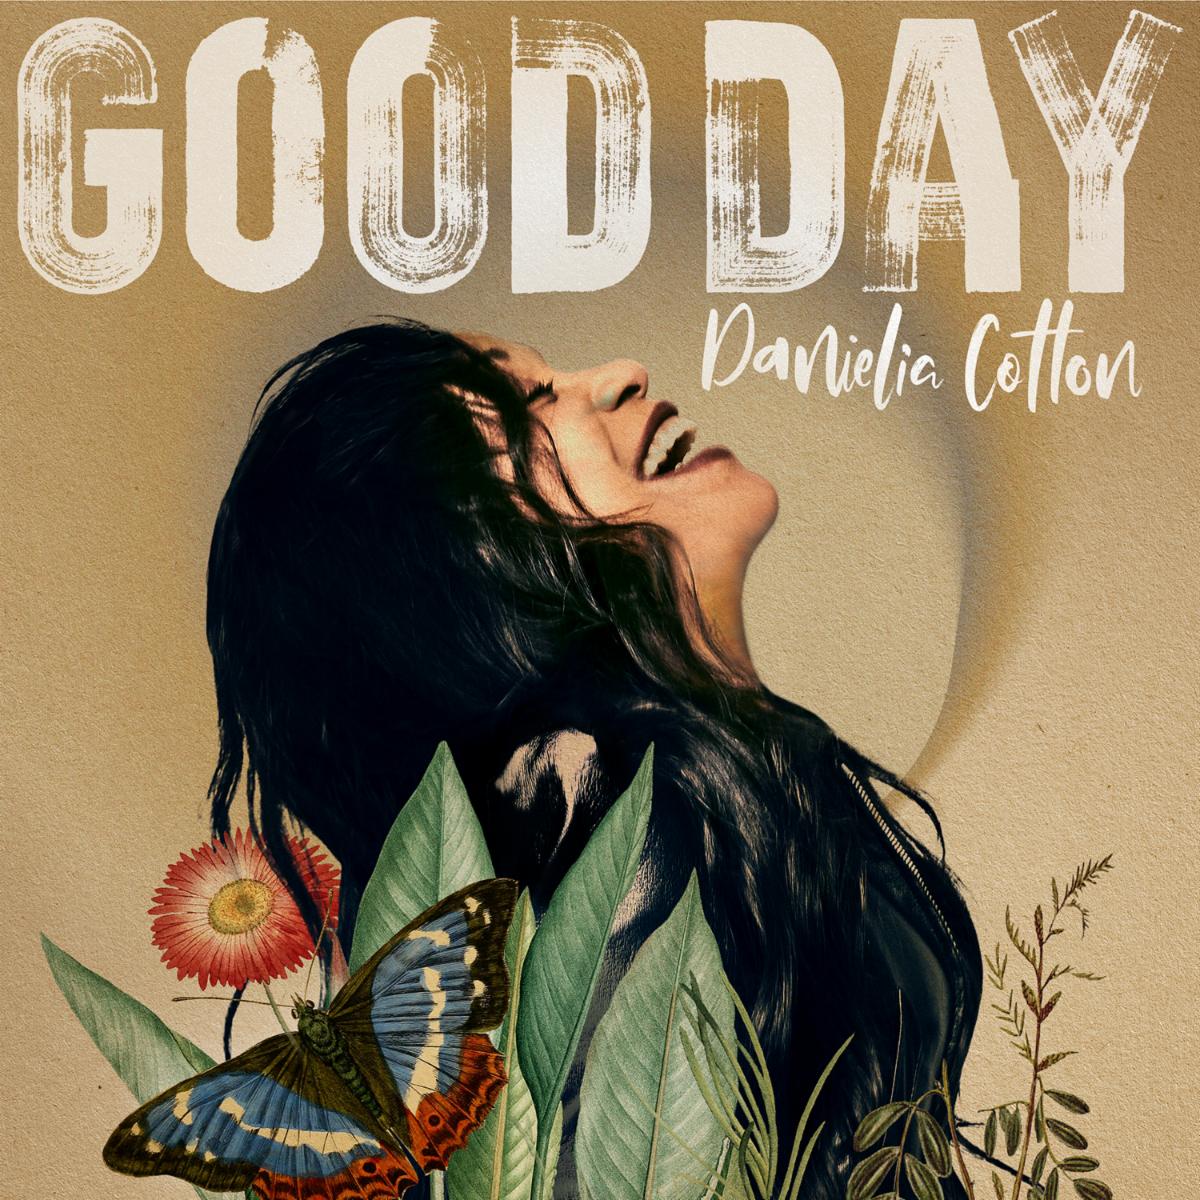 Cover art for Danielia Cotton's "Good Day" single; a woman laughs with her head back, framed by butterflies and green leaves.